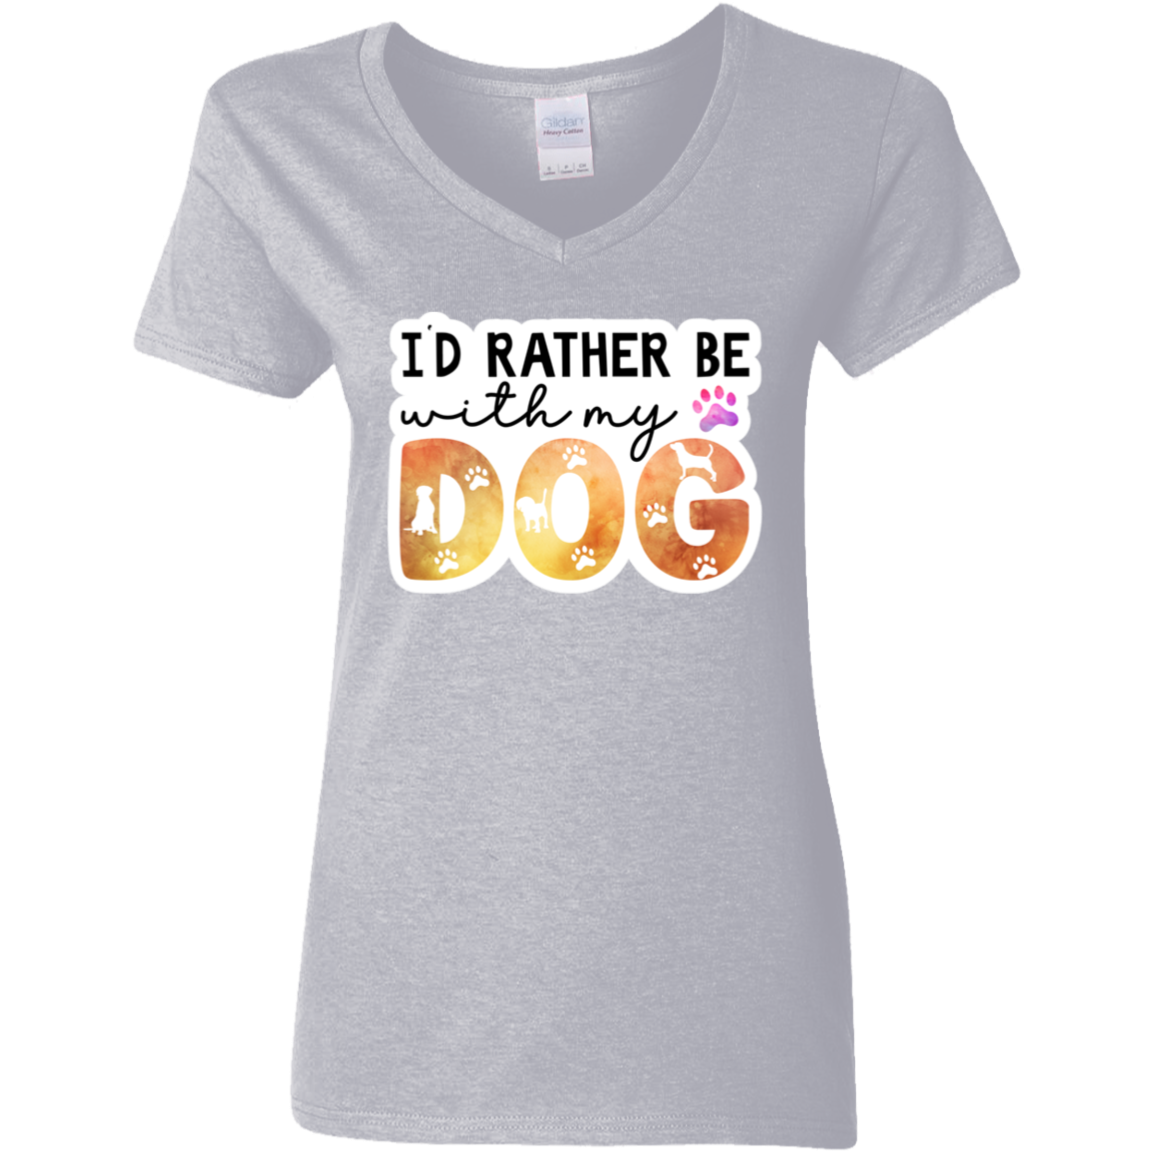 I'd Rather Be With My Dog Watercolor Ladies' V-Neck T-Shirt